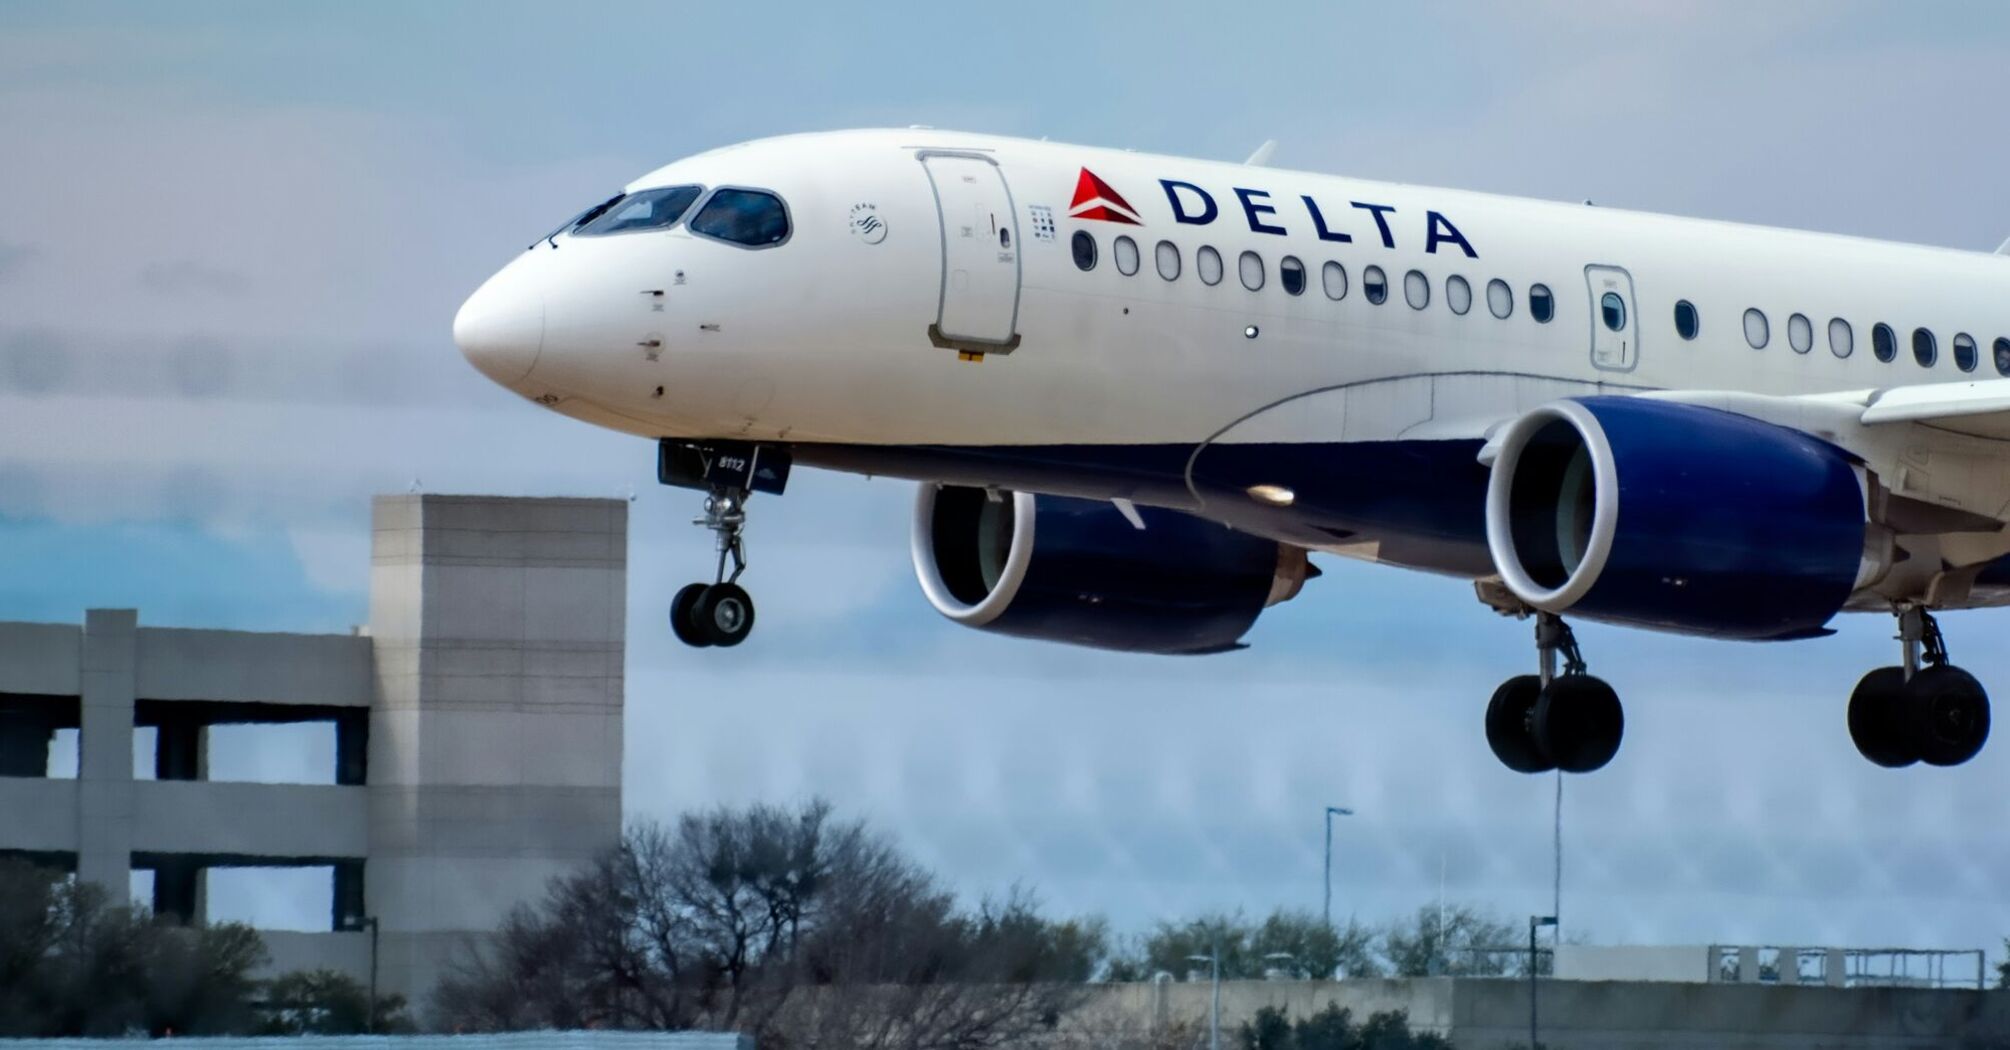 A passenger of Delta Airlines attempted to board a flight by presenting a photographed ticket belonging to another passenger as his own